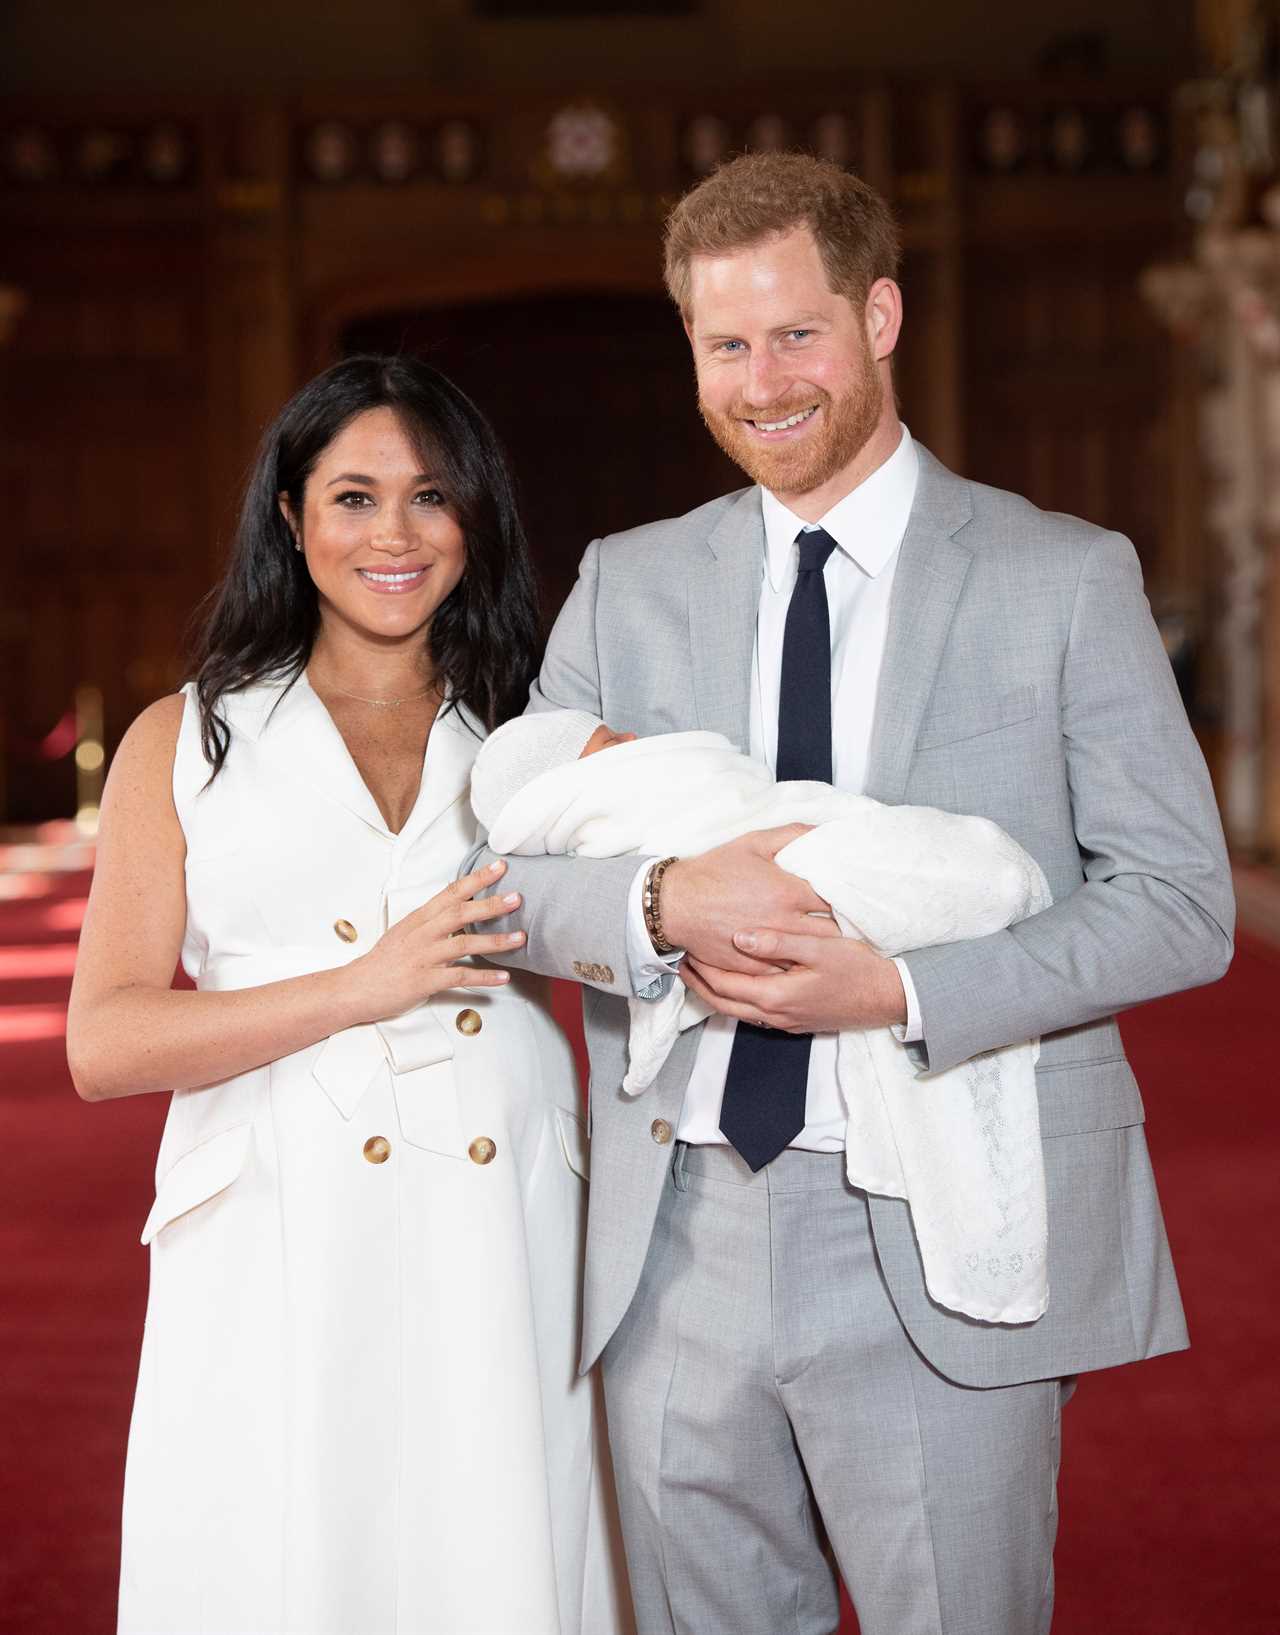 Meghan and Harry announced the baby news on Sunday in a statement on the Archwell website